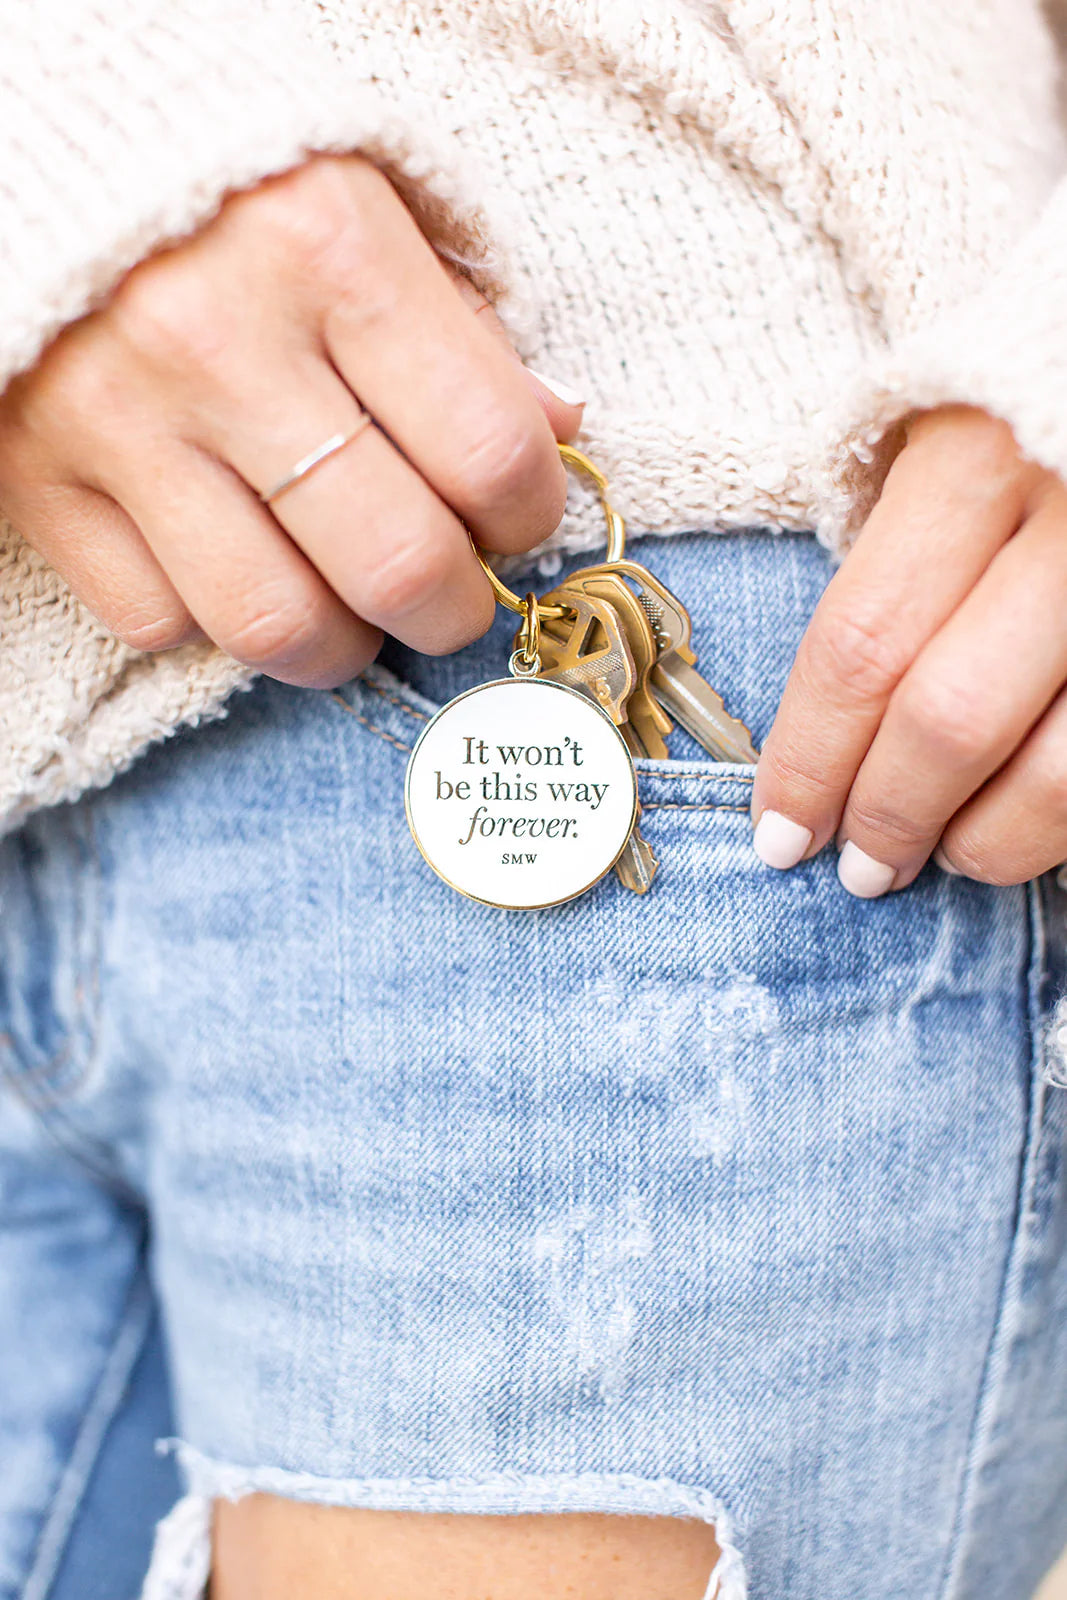 Forever keychain quote for your car keys